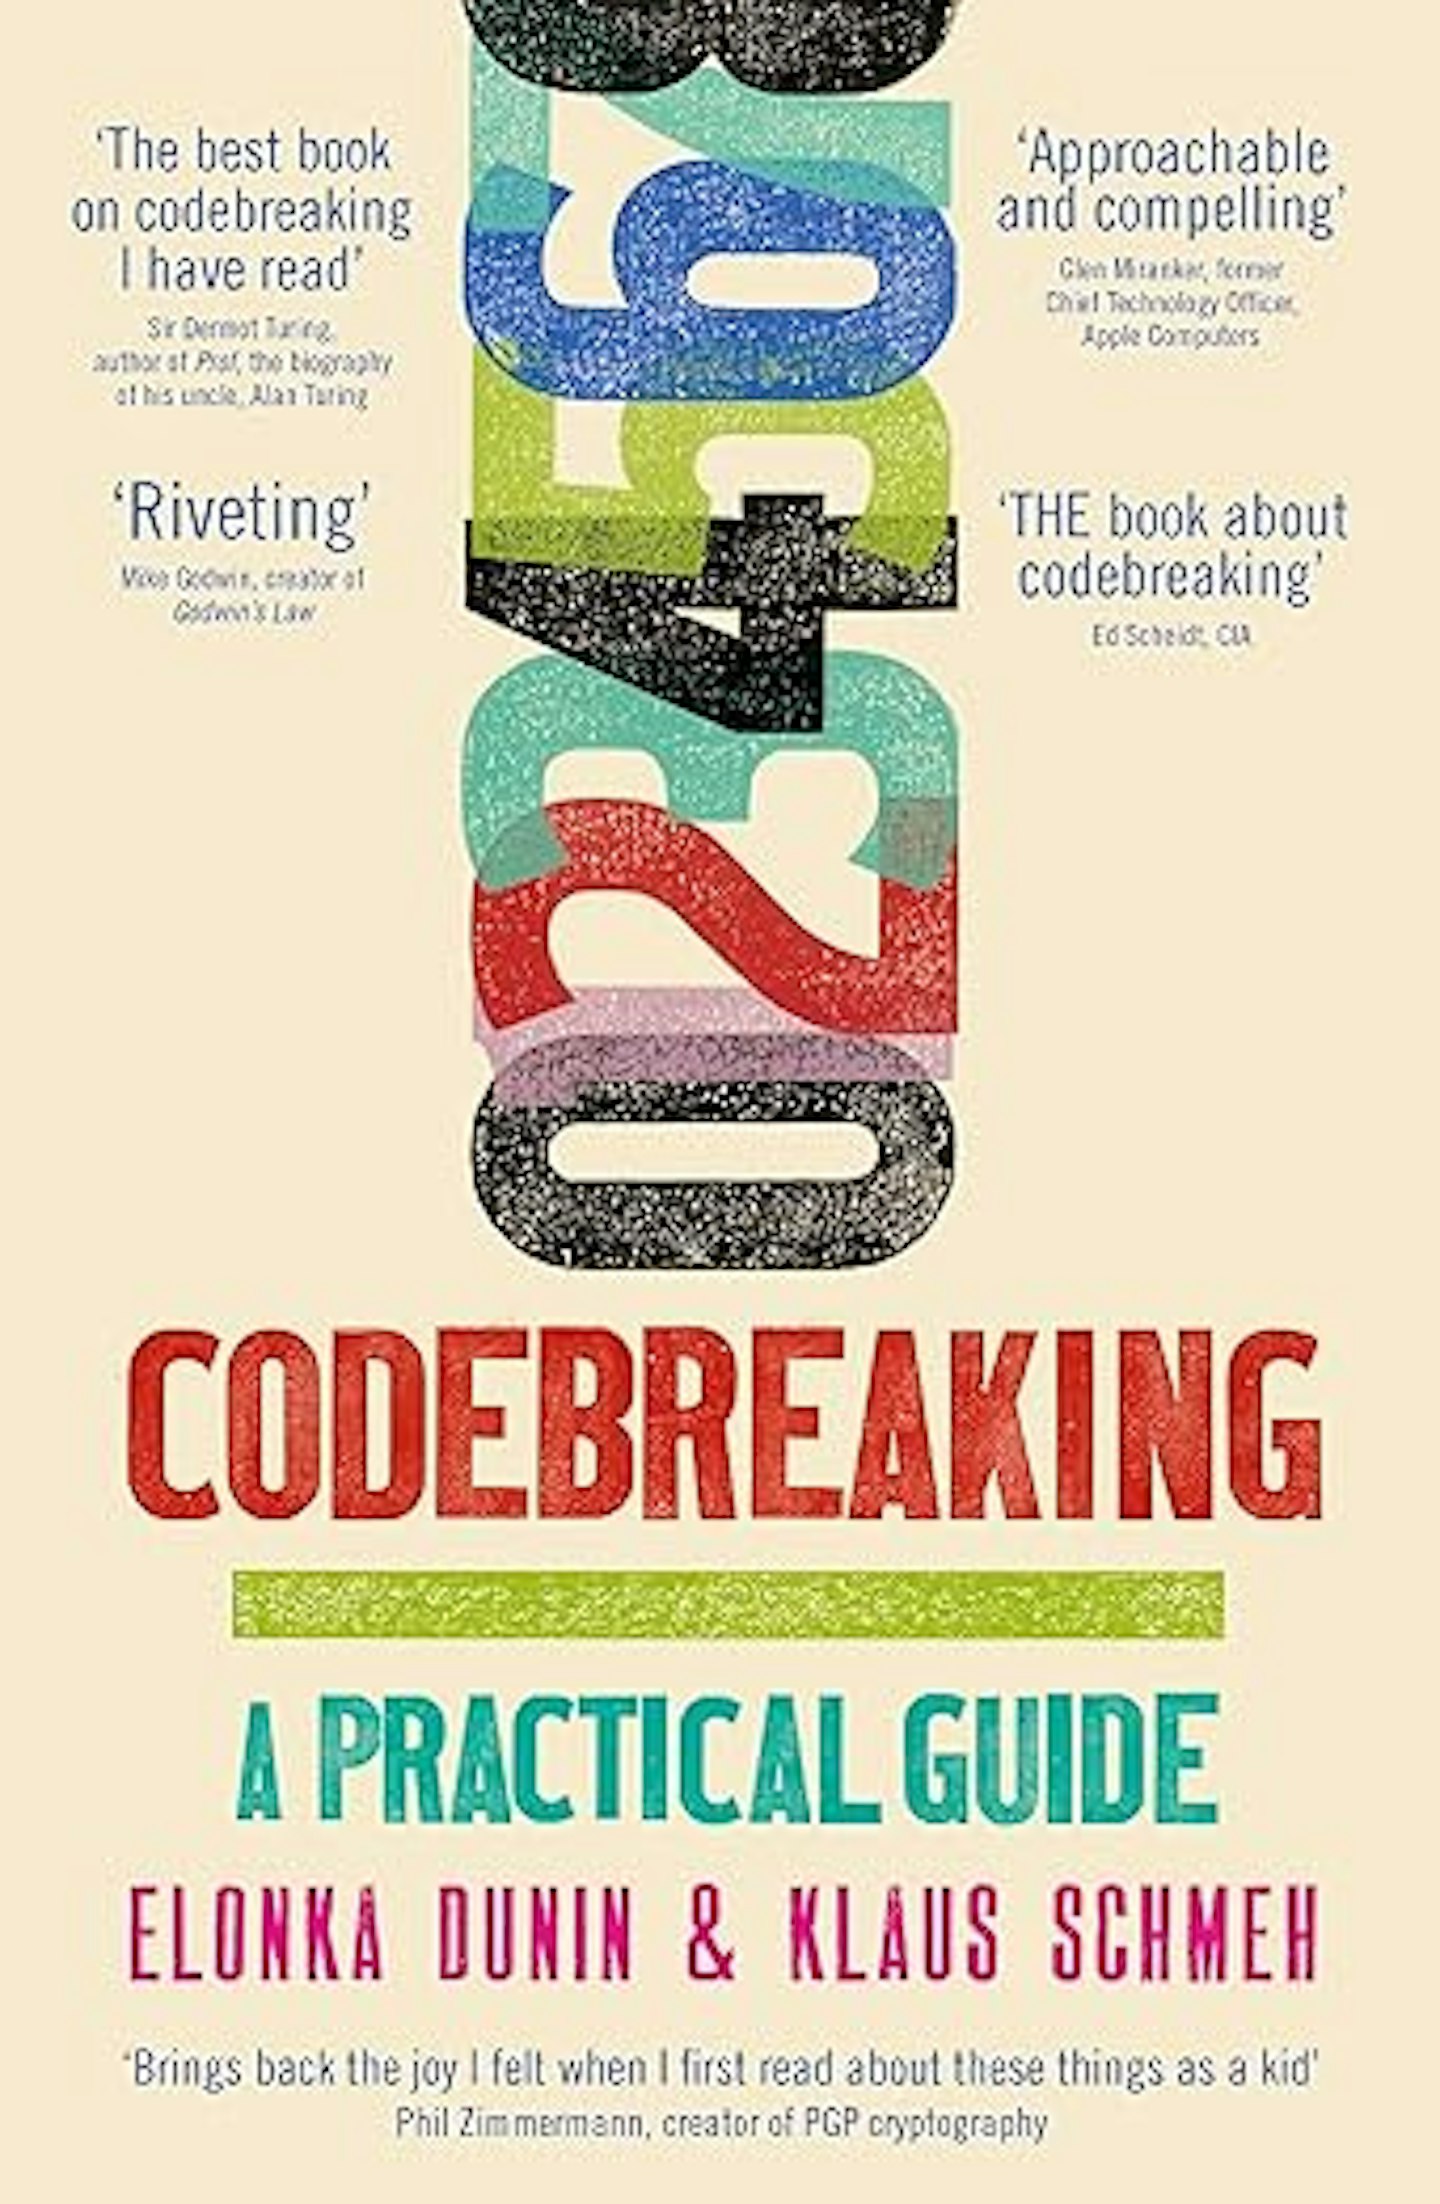 Codebreaking: A Practical Guide book cover